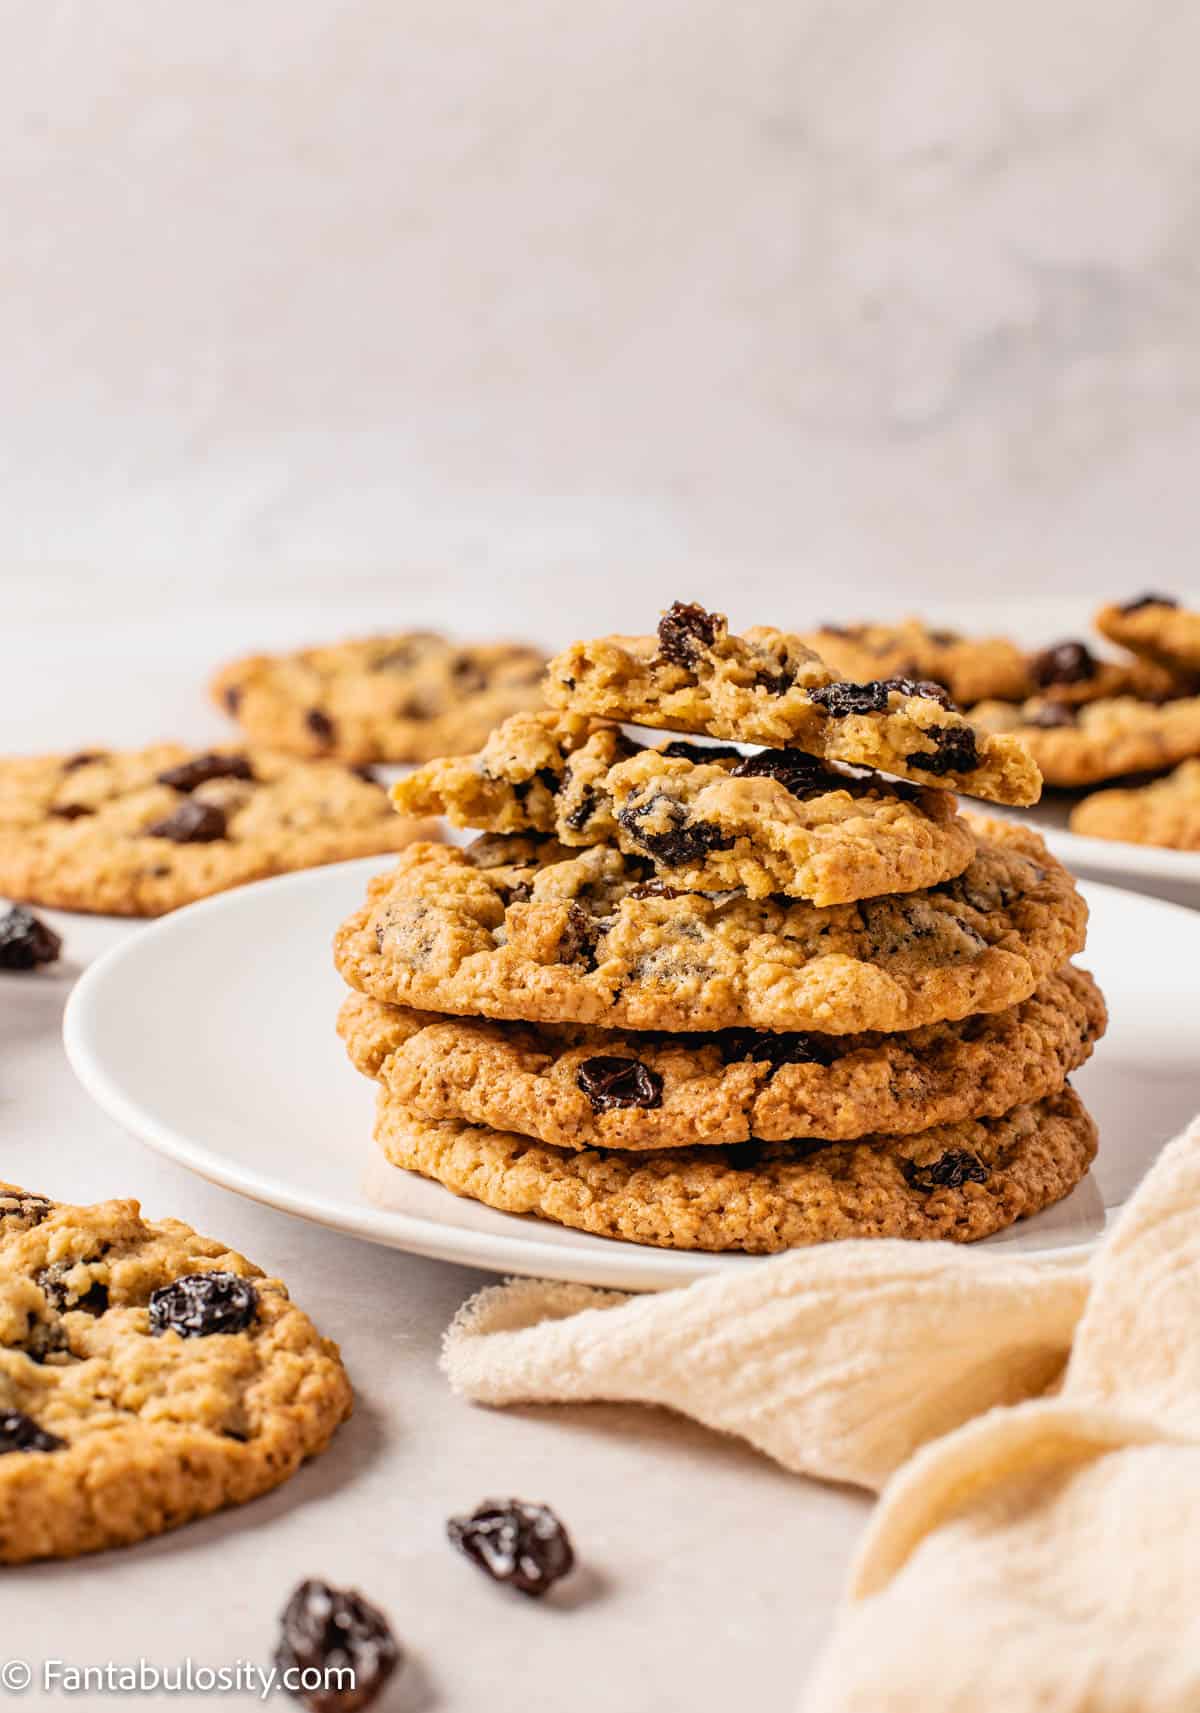 Oatmeal Raisin Cookies stacked on a plate.